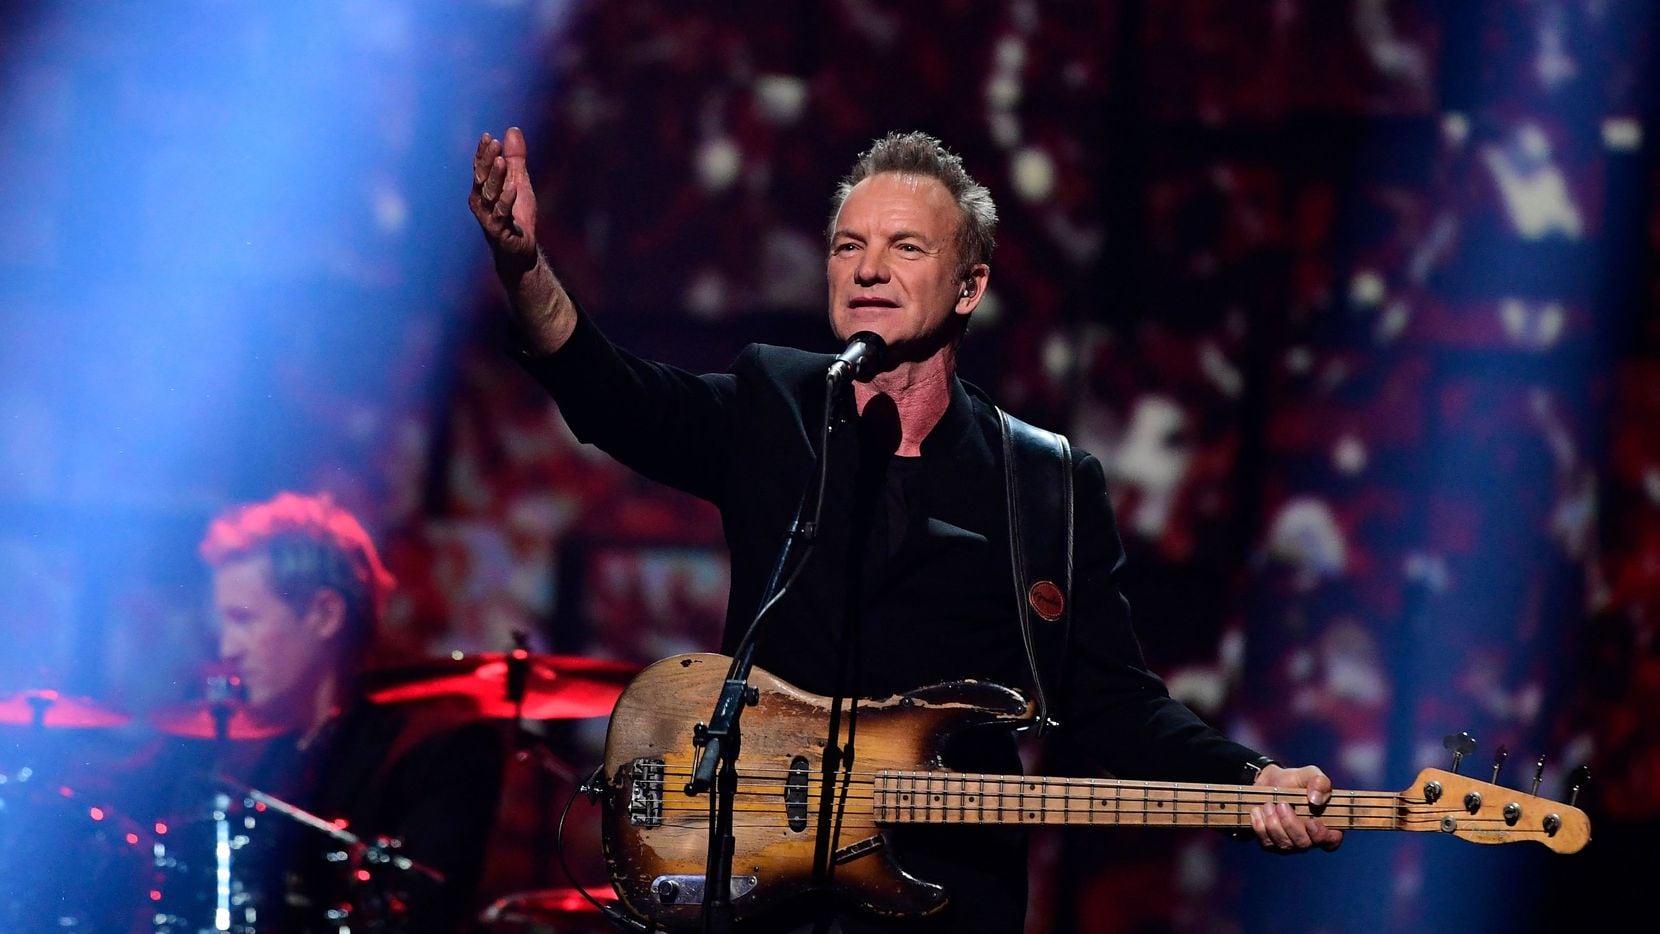 In this 2016 file photo, British singer Sting performs during the Nobel Peace Prize concert in Oslo, Norway.